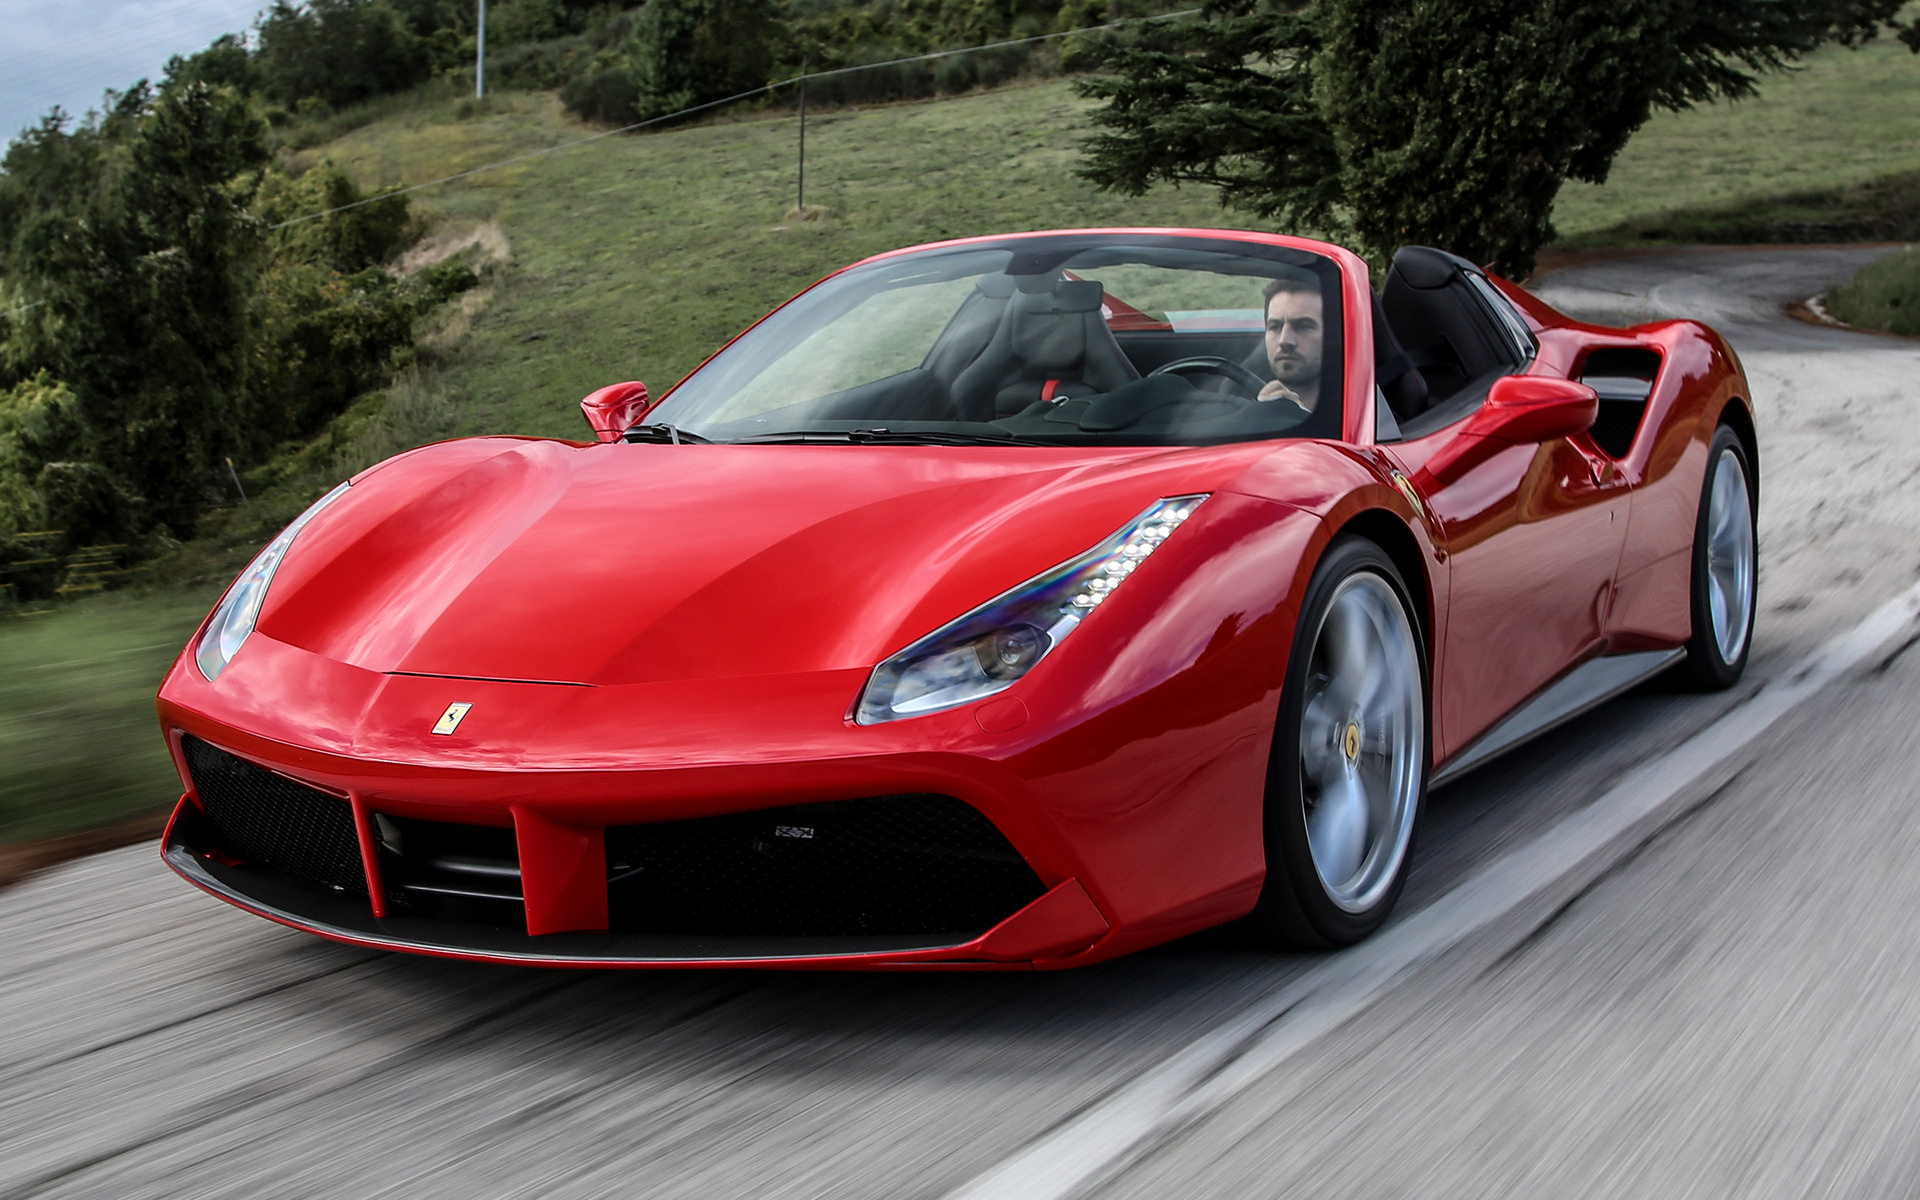 Drive a Luxury Car from Supreme Exotic Car Rental – Los Angeles, Now